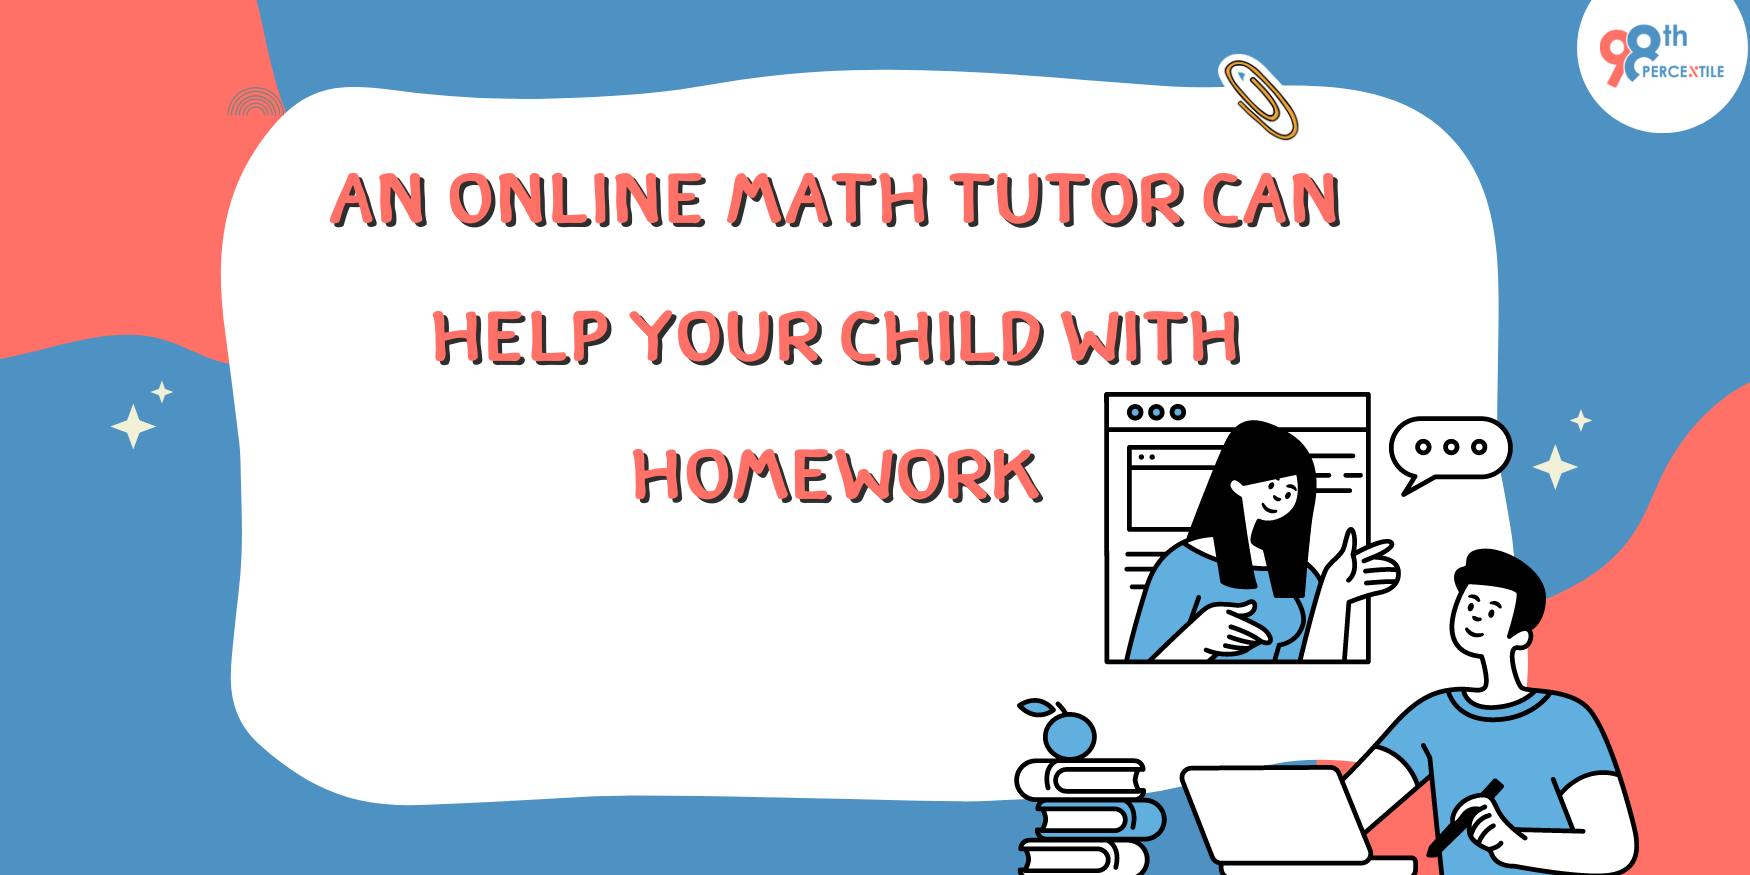 An Online Math Tutor Can Help Your Child With Homework